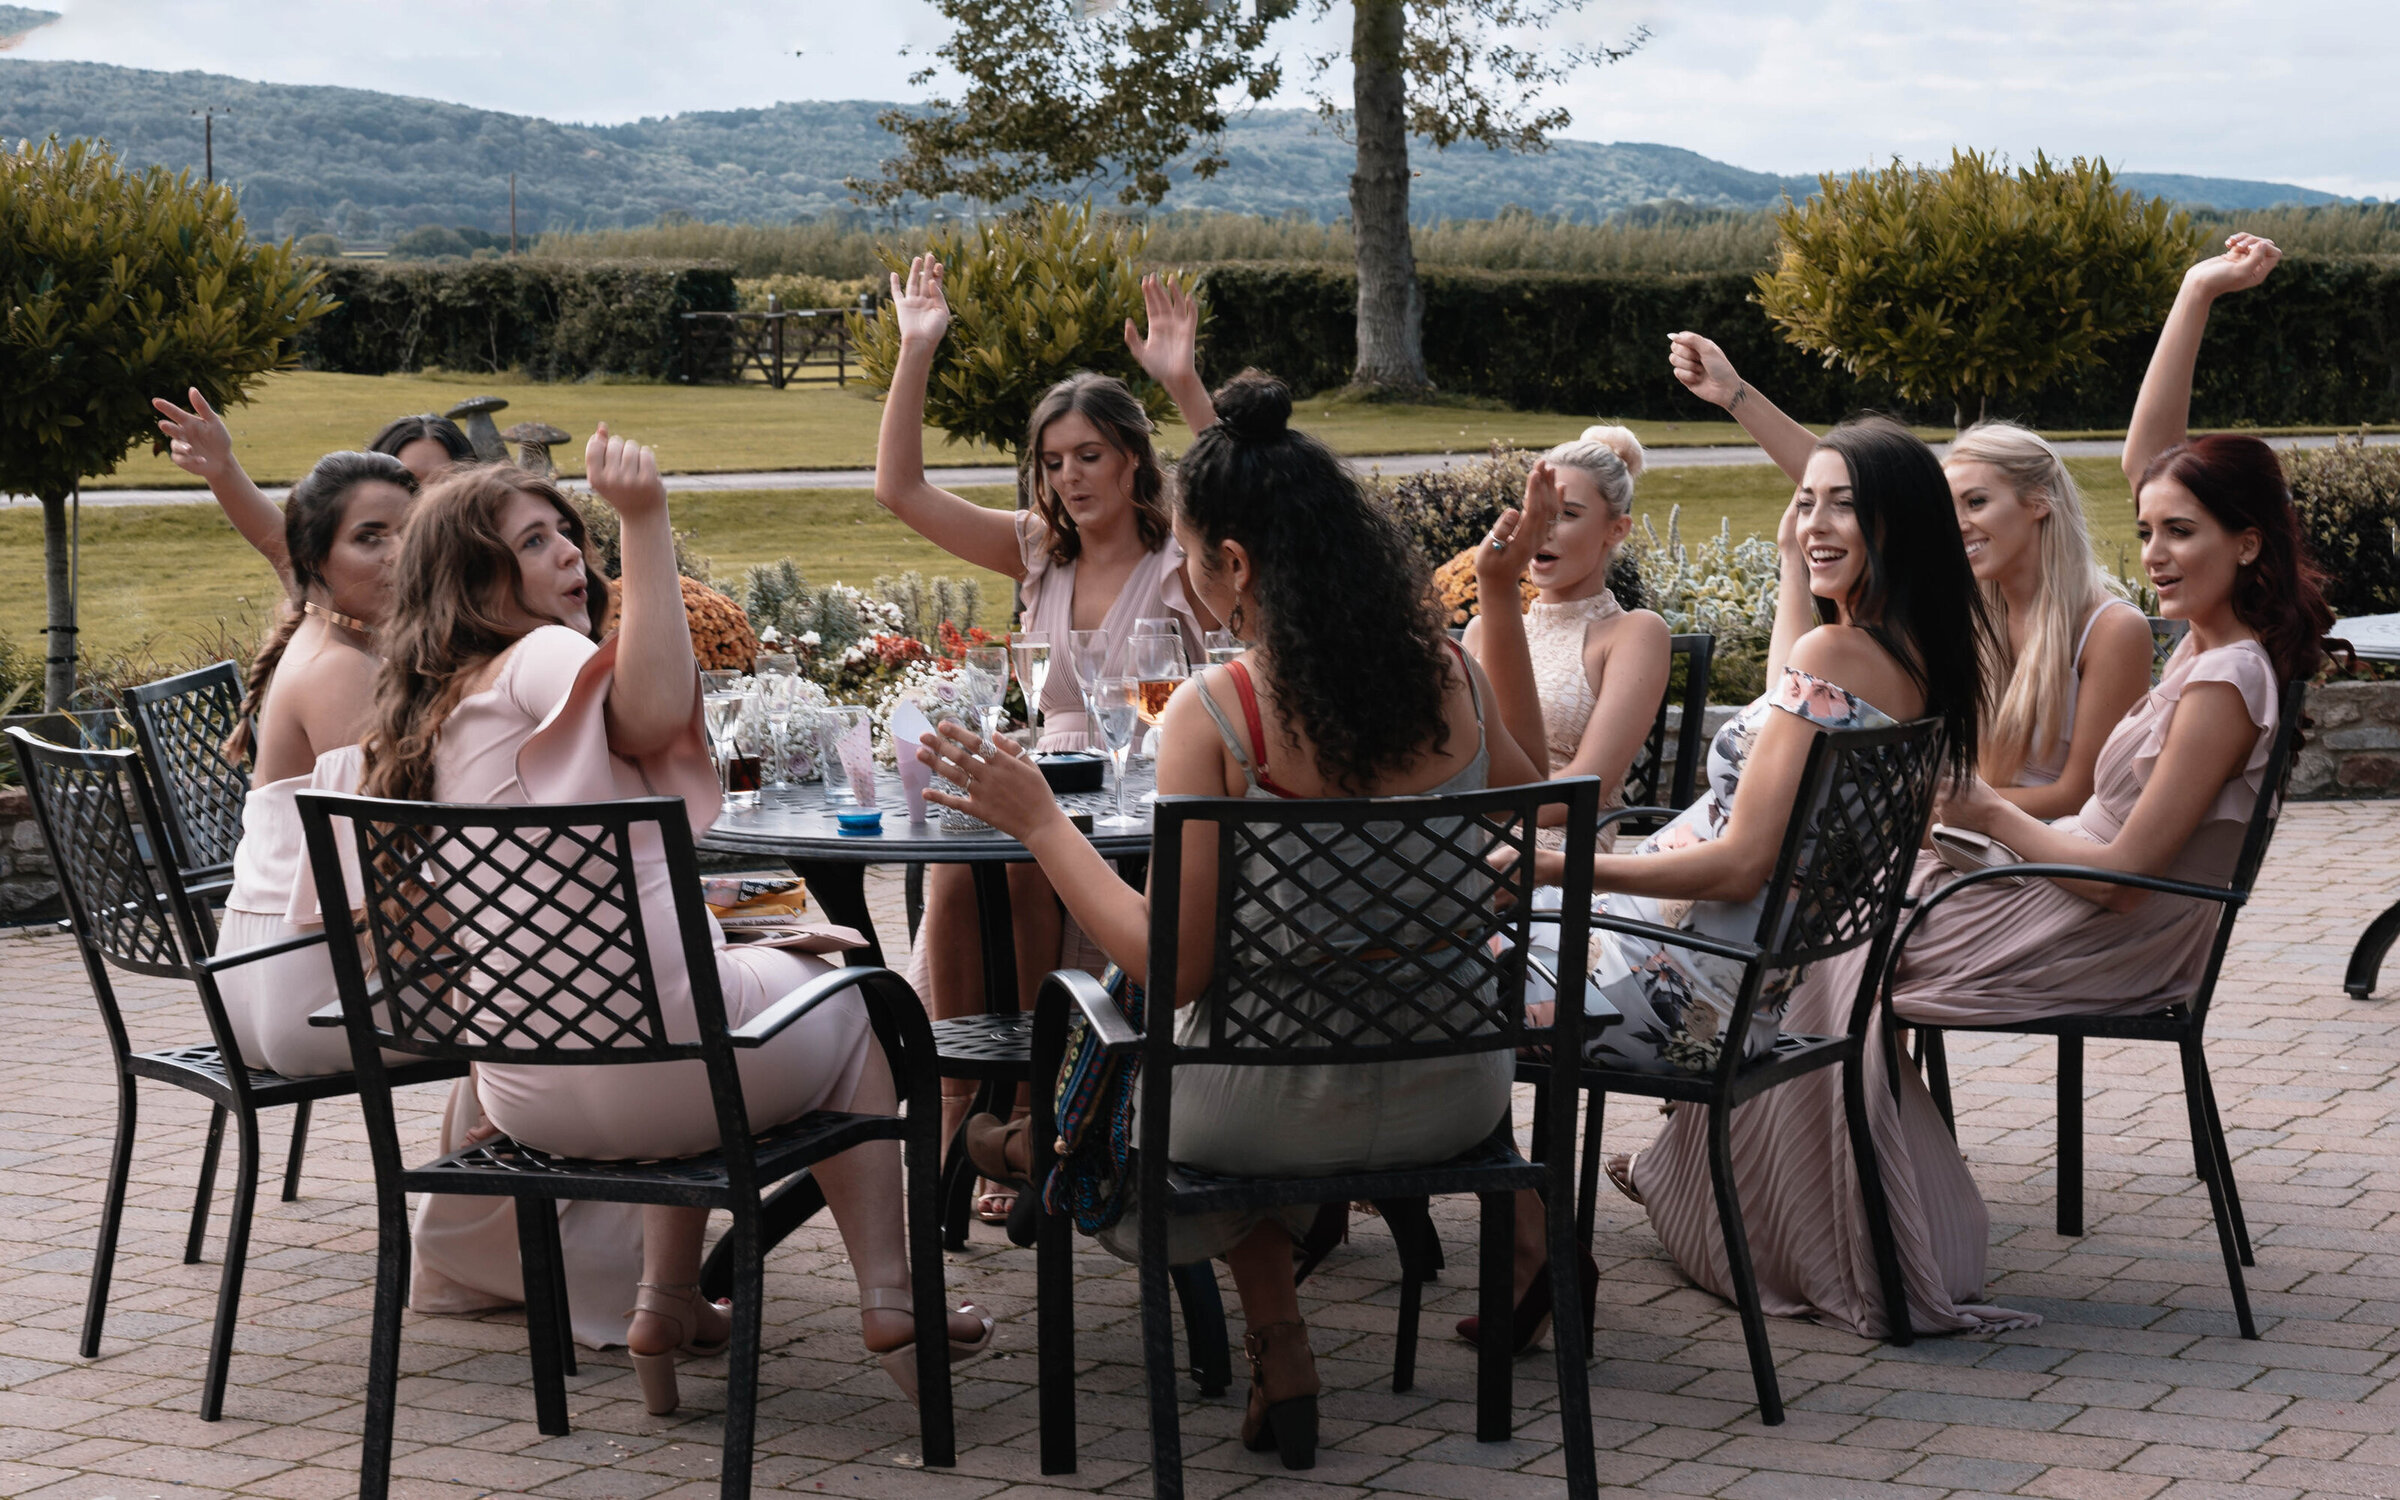 Bridesmaids and friends seated on garden furniture cheering and raising their hands